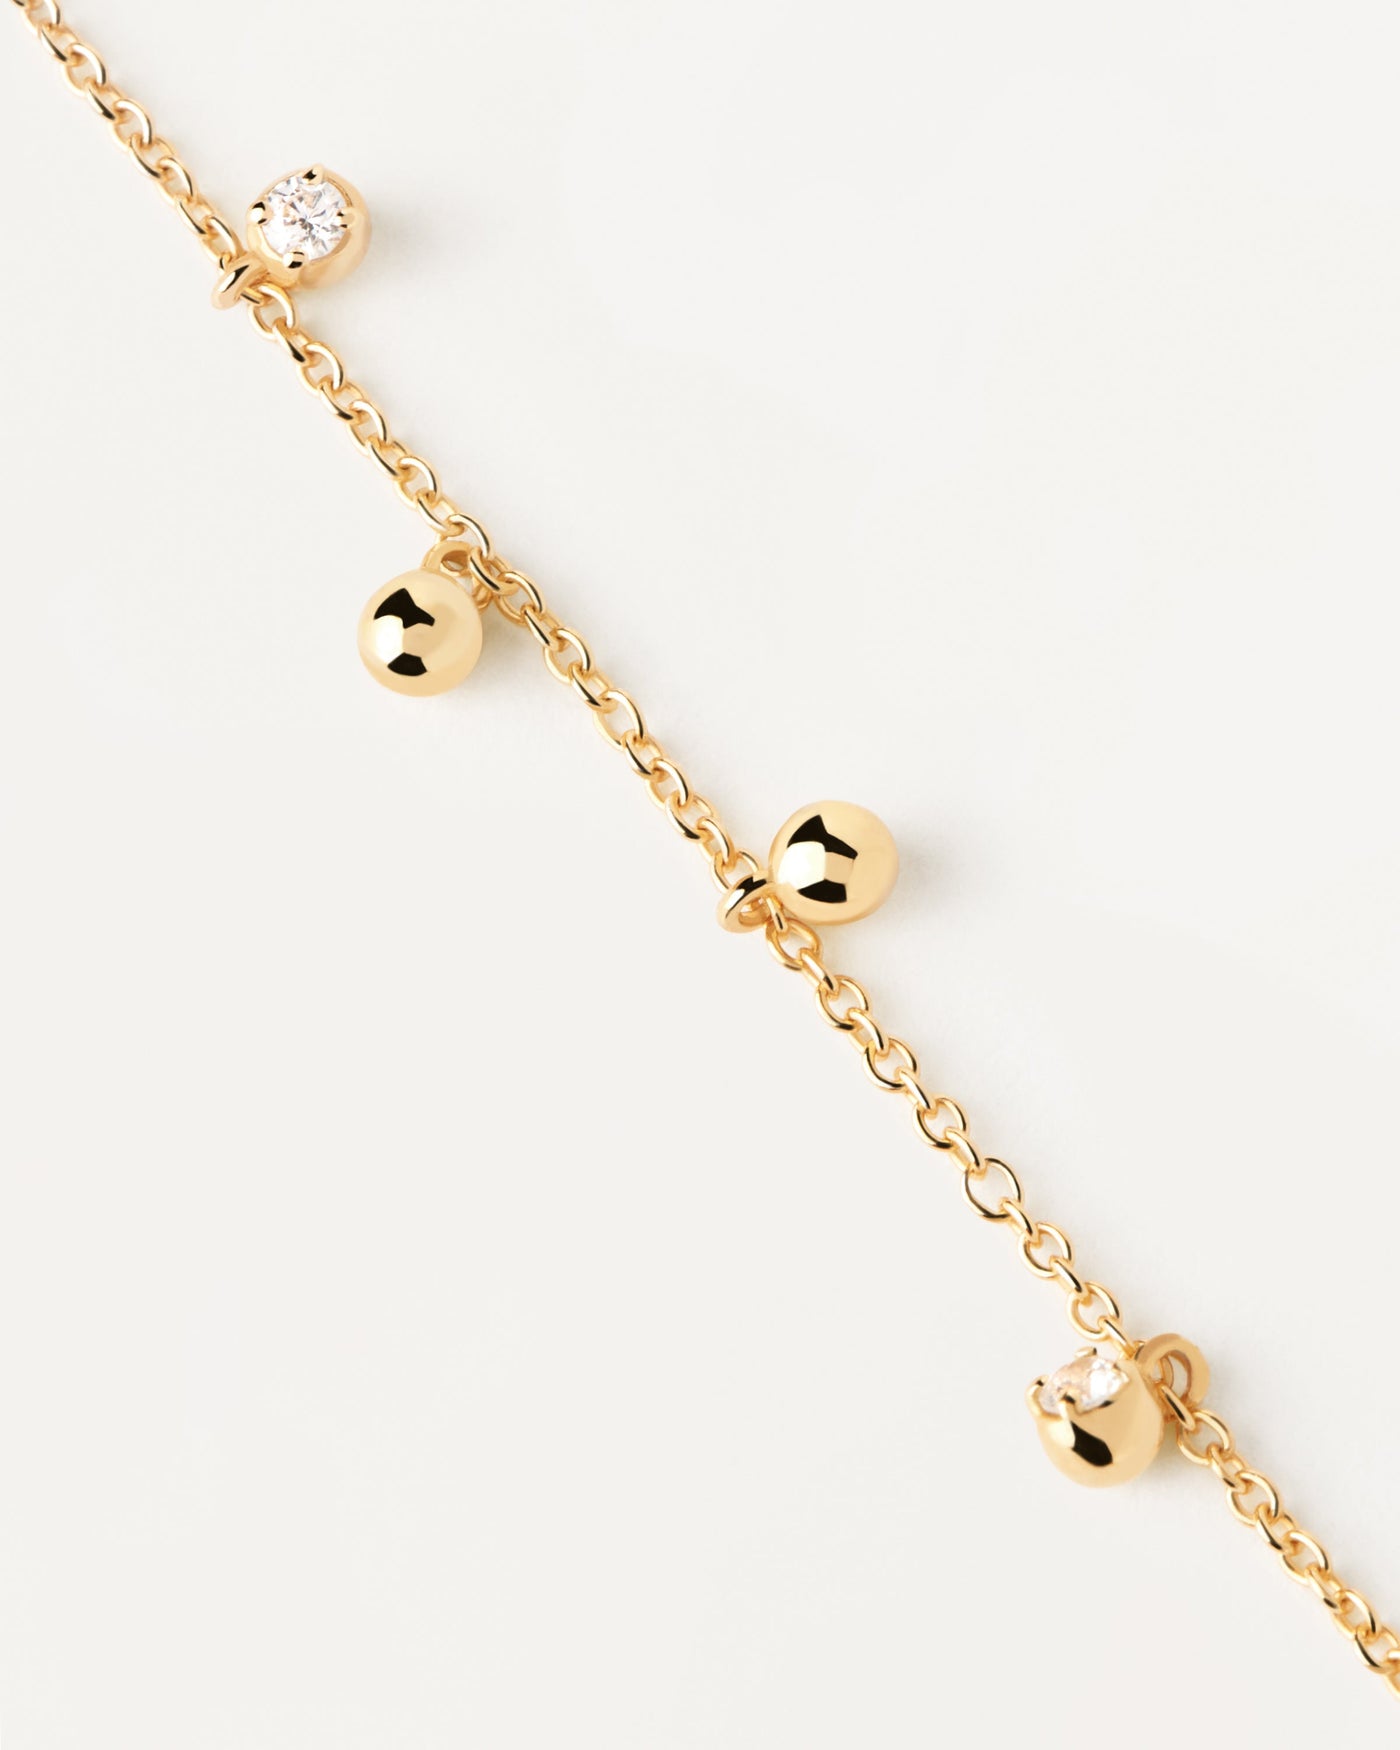 2023 Selection | Bubble Bracelet. Gold-plated silver bracelet with small zirconia and ball pendants. Get the latest arrival from PDPAOLA. Place your order safely and get this Best Seller. Free Shipping.